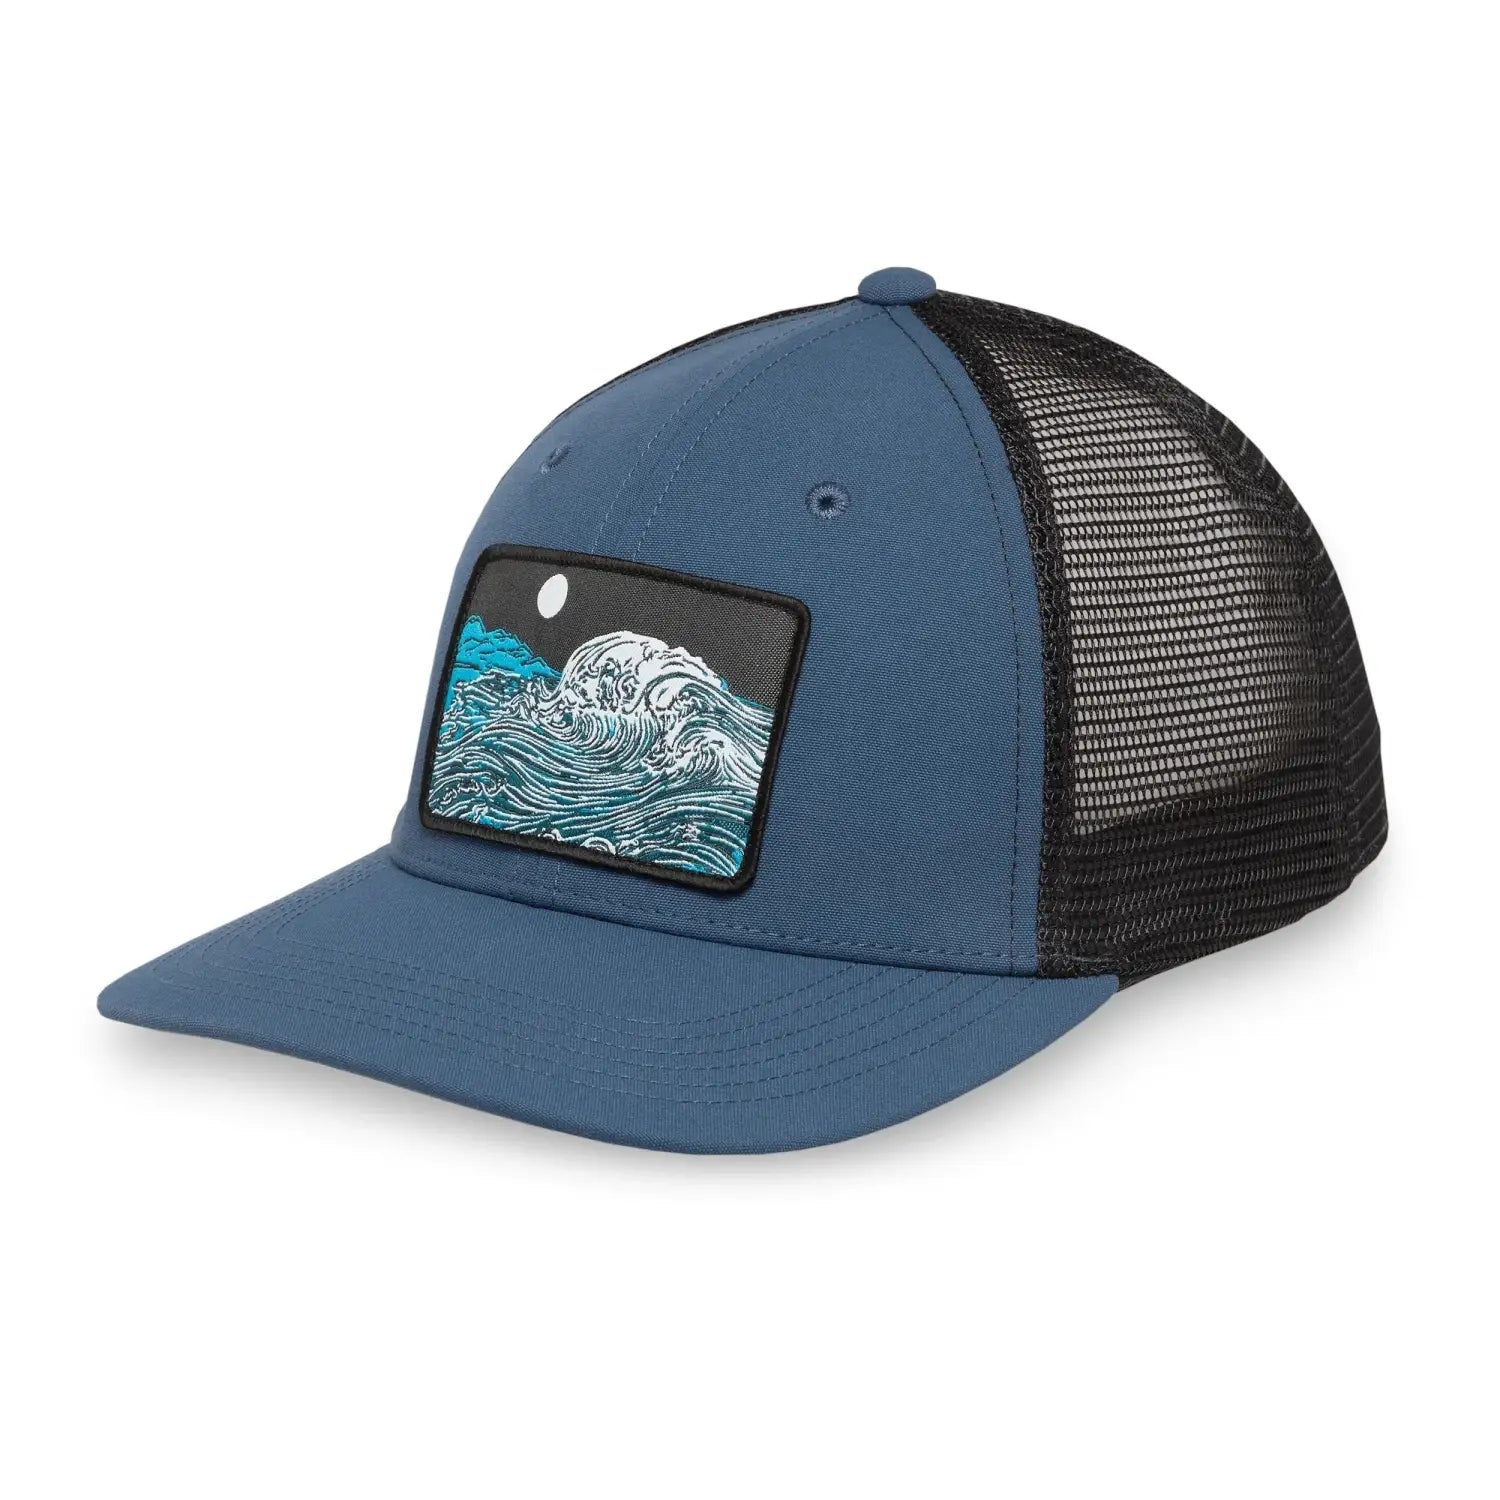 Sunday Afternoon Crashing Waves Trucker Front View